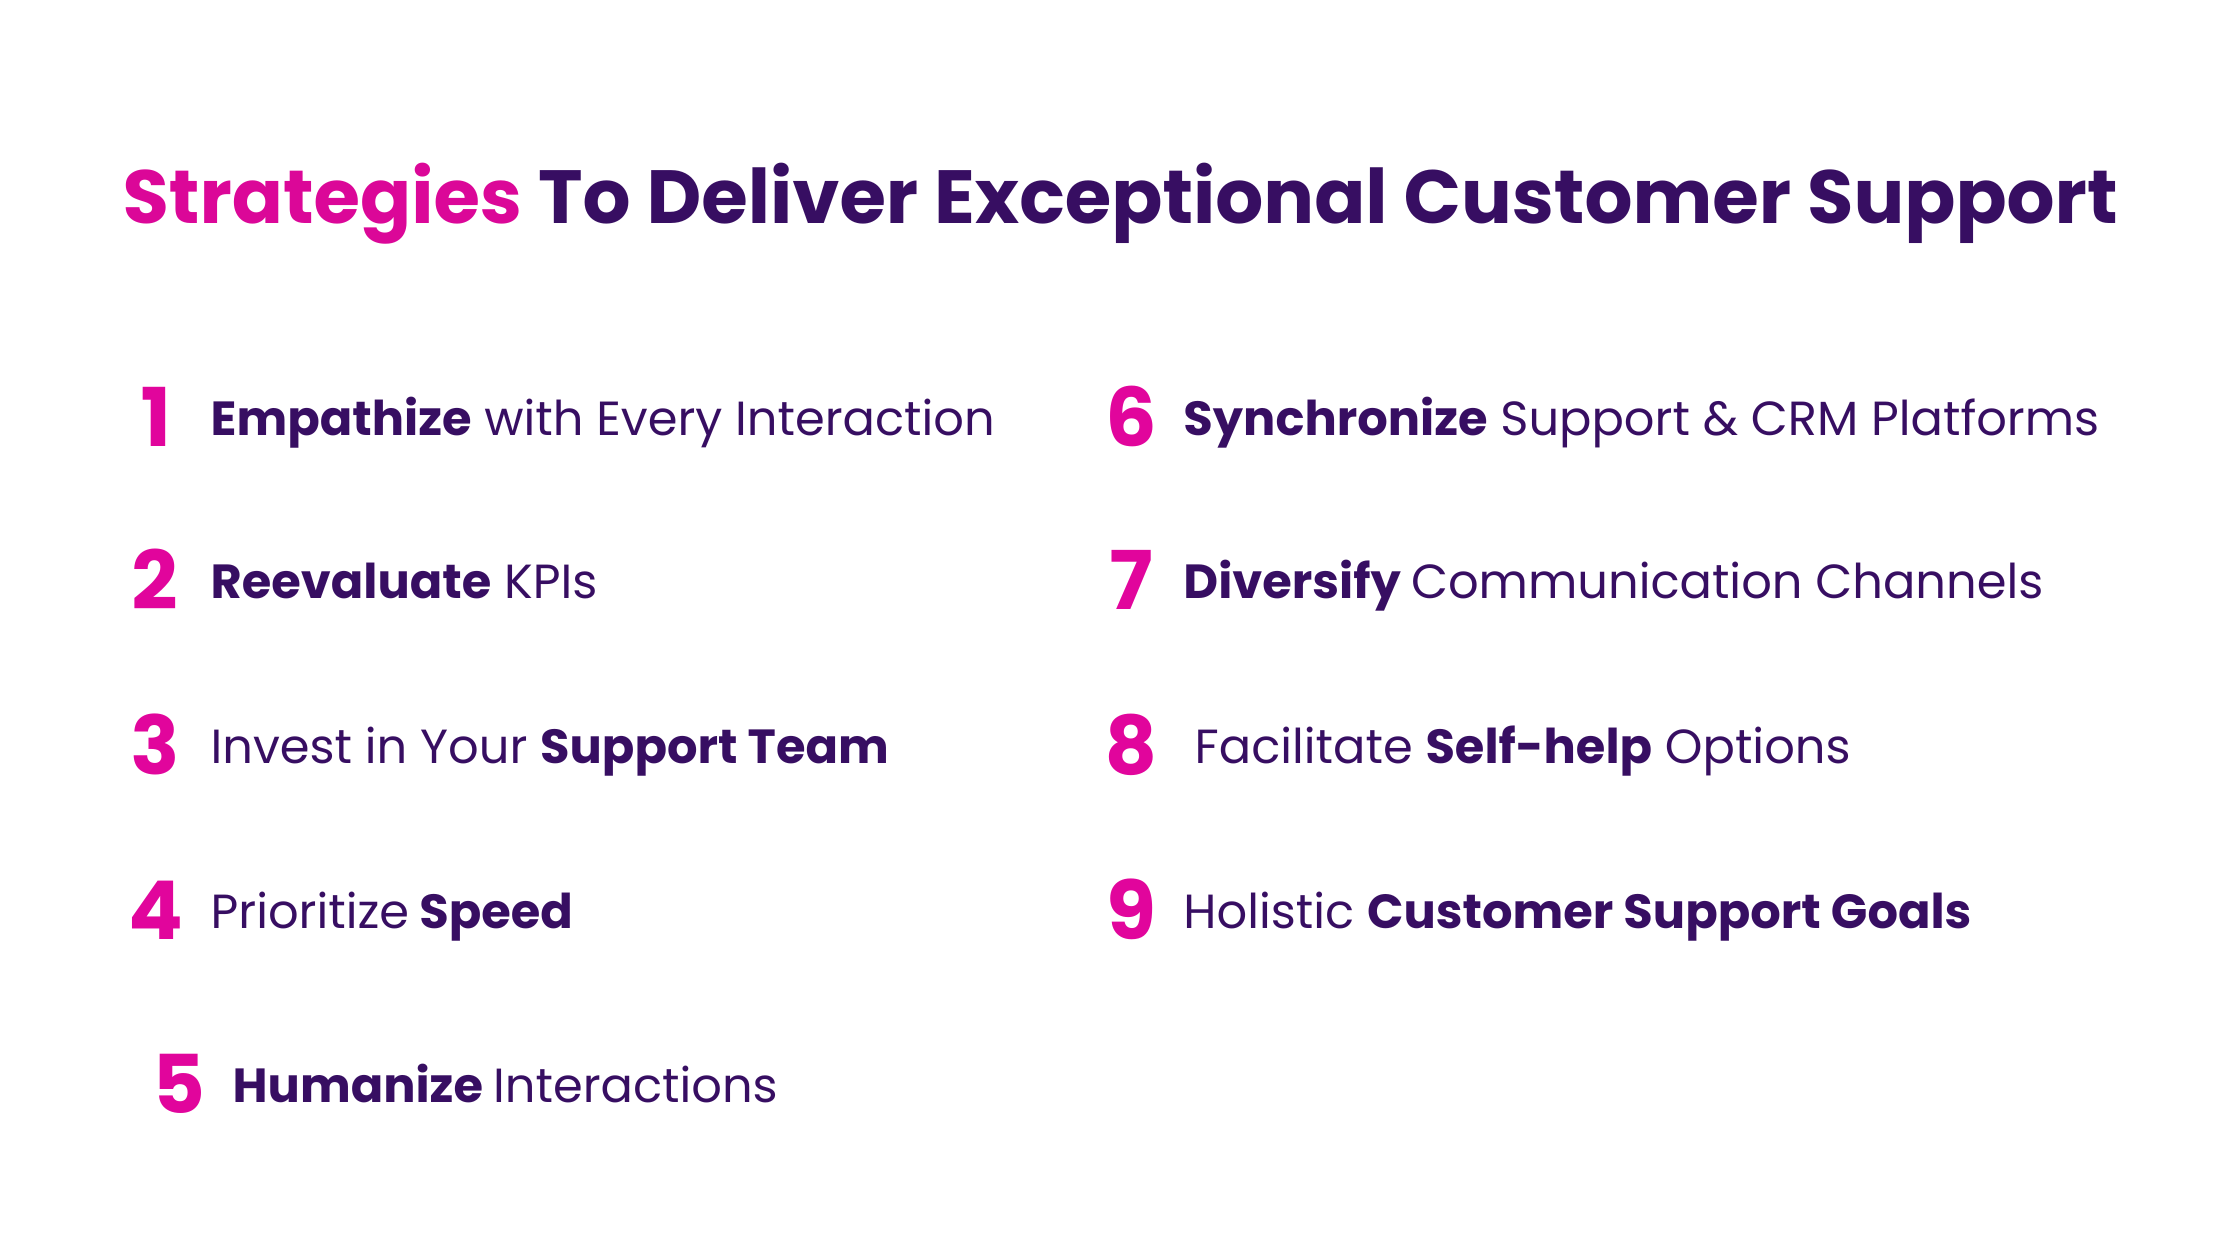 Strategies To Deliver Exceptional Customer Support